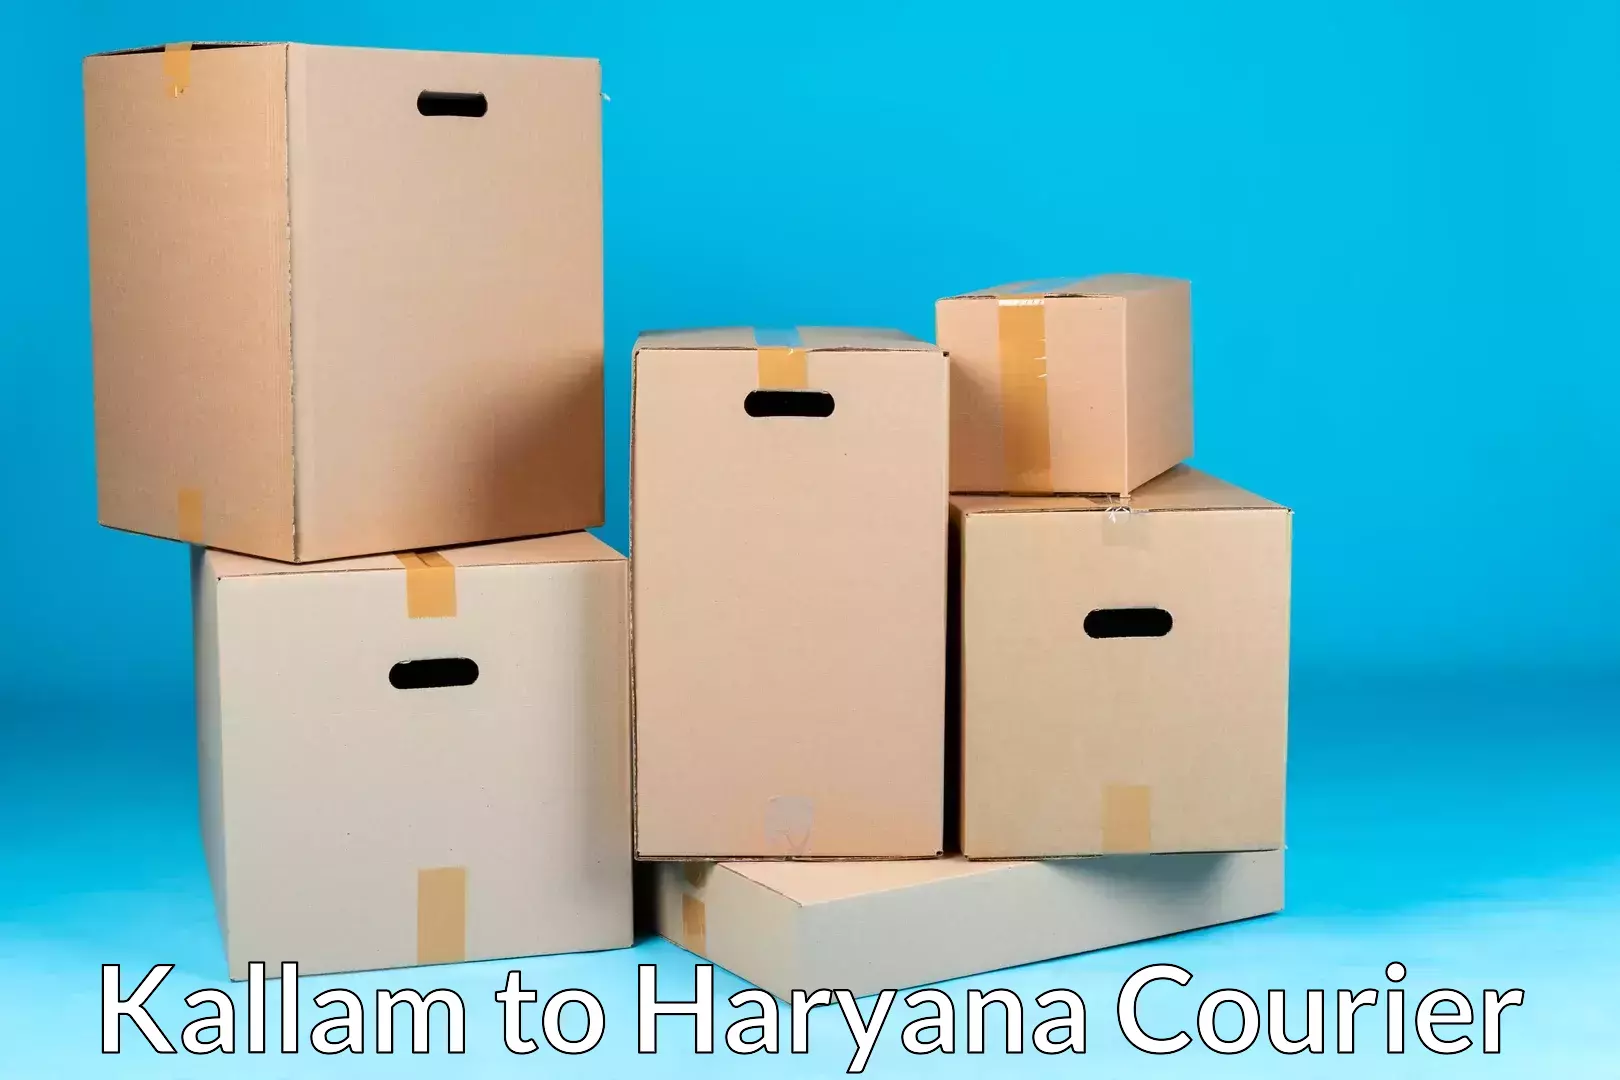 Moving and packing experts Kallam to Gurgaon